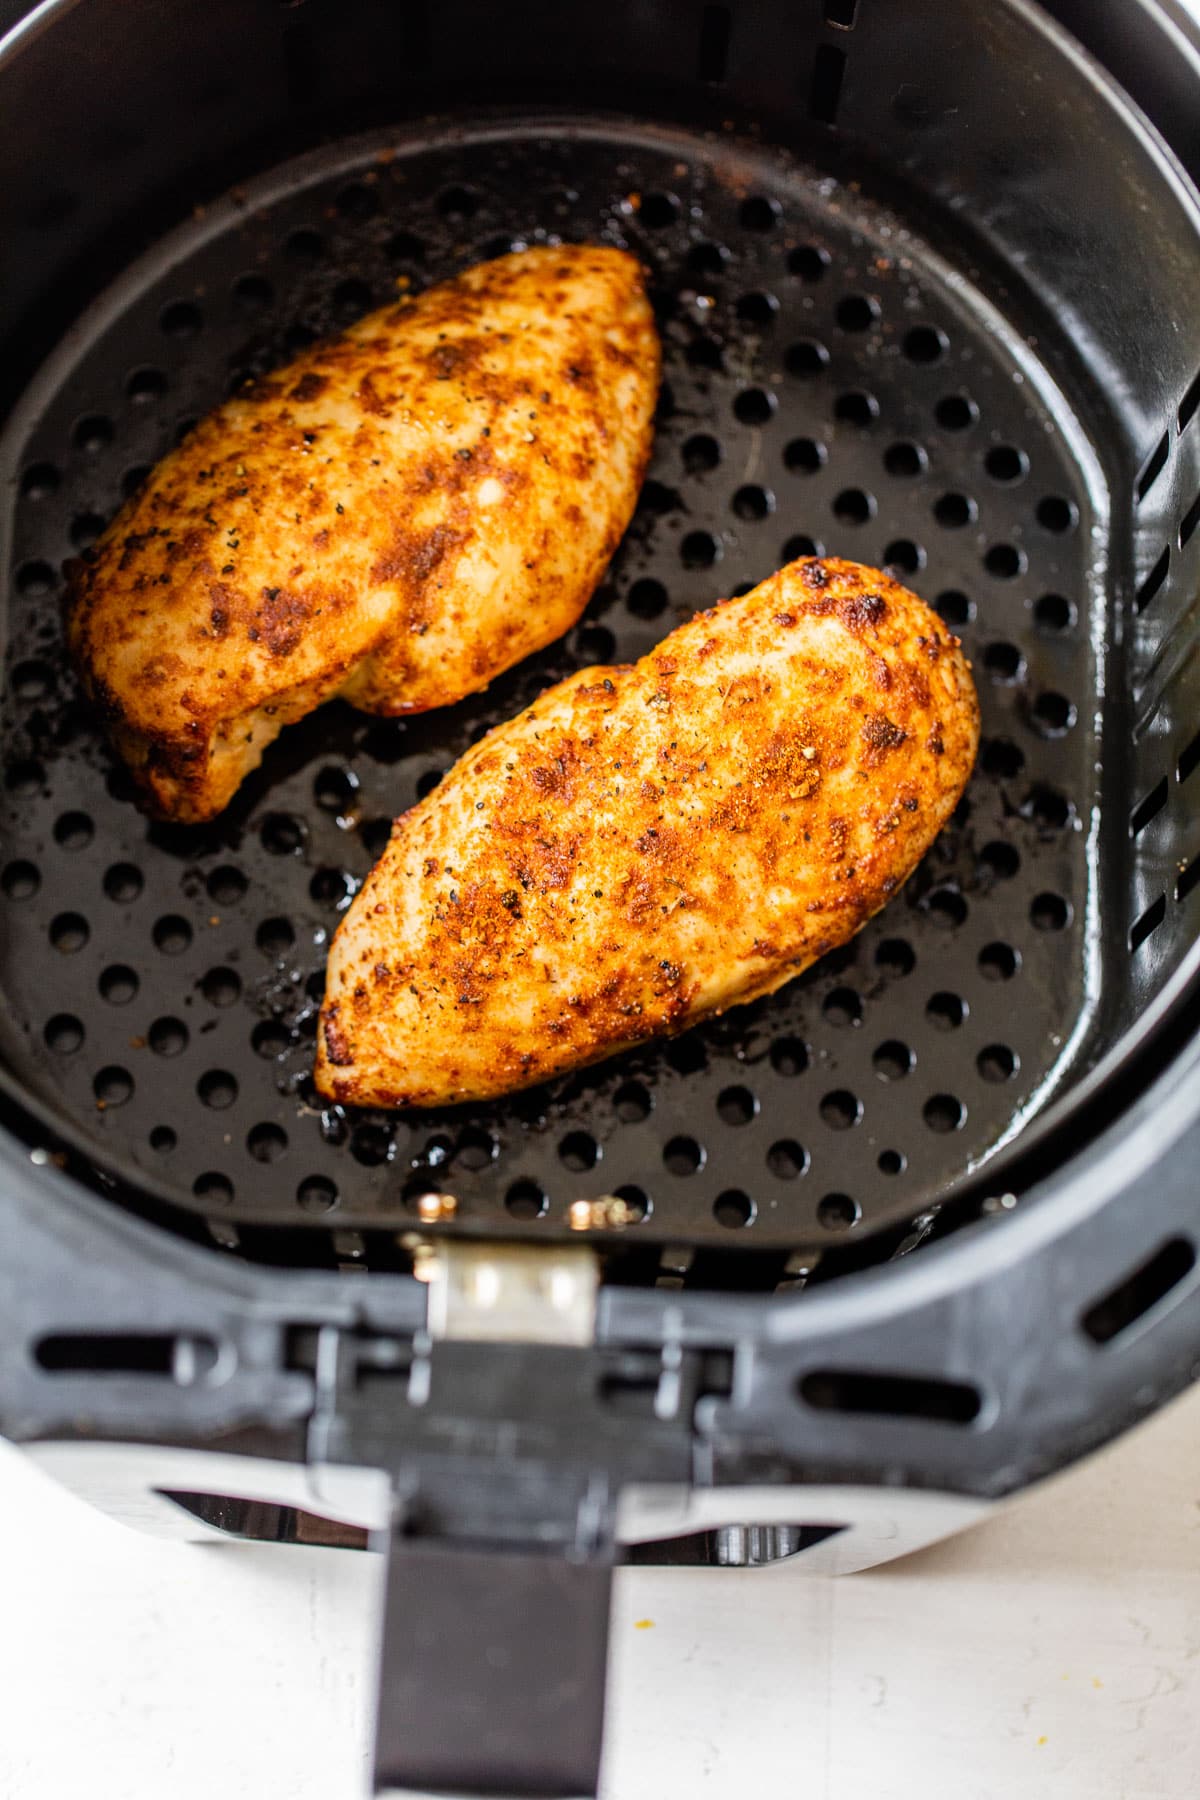 Two chicken breasts in an air fryer